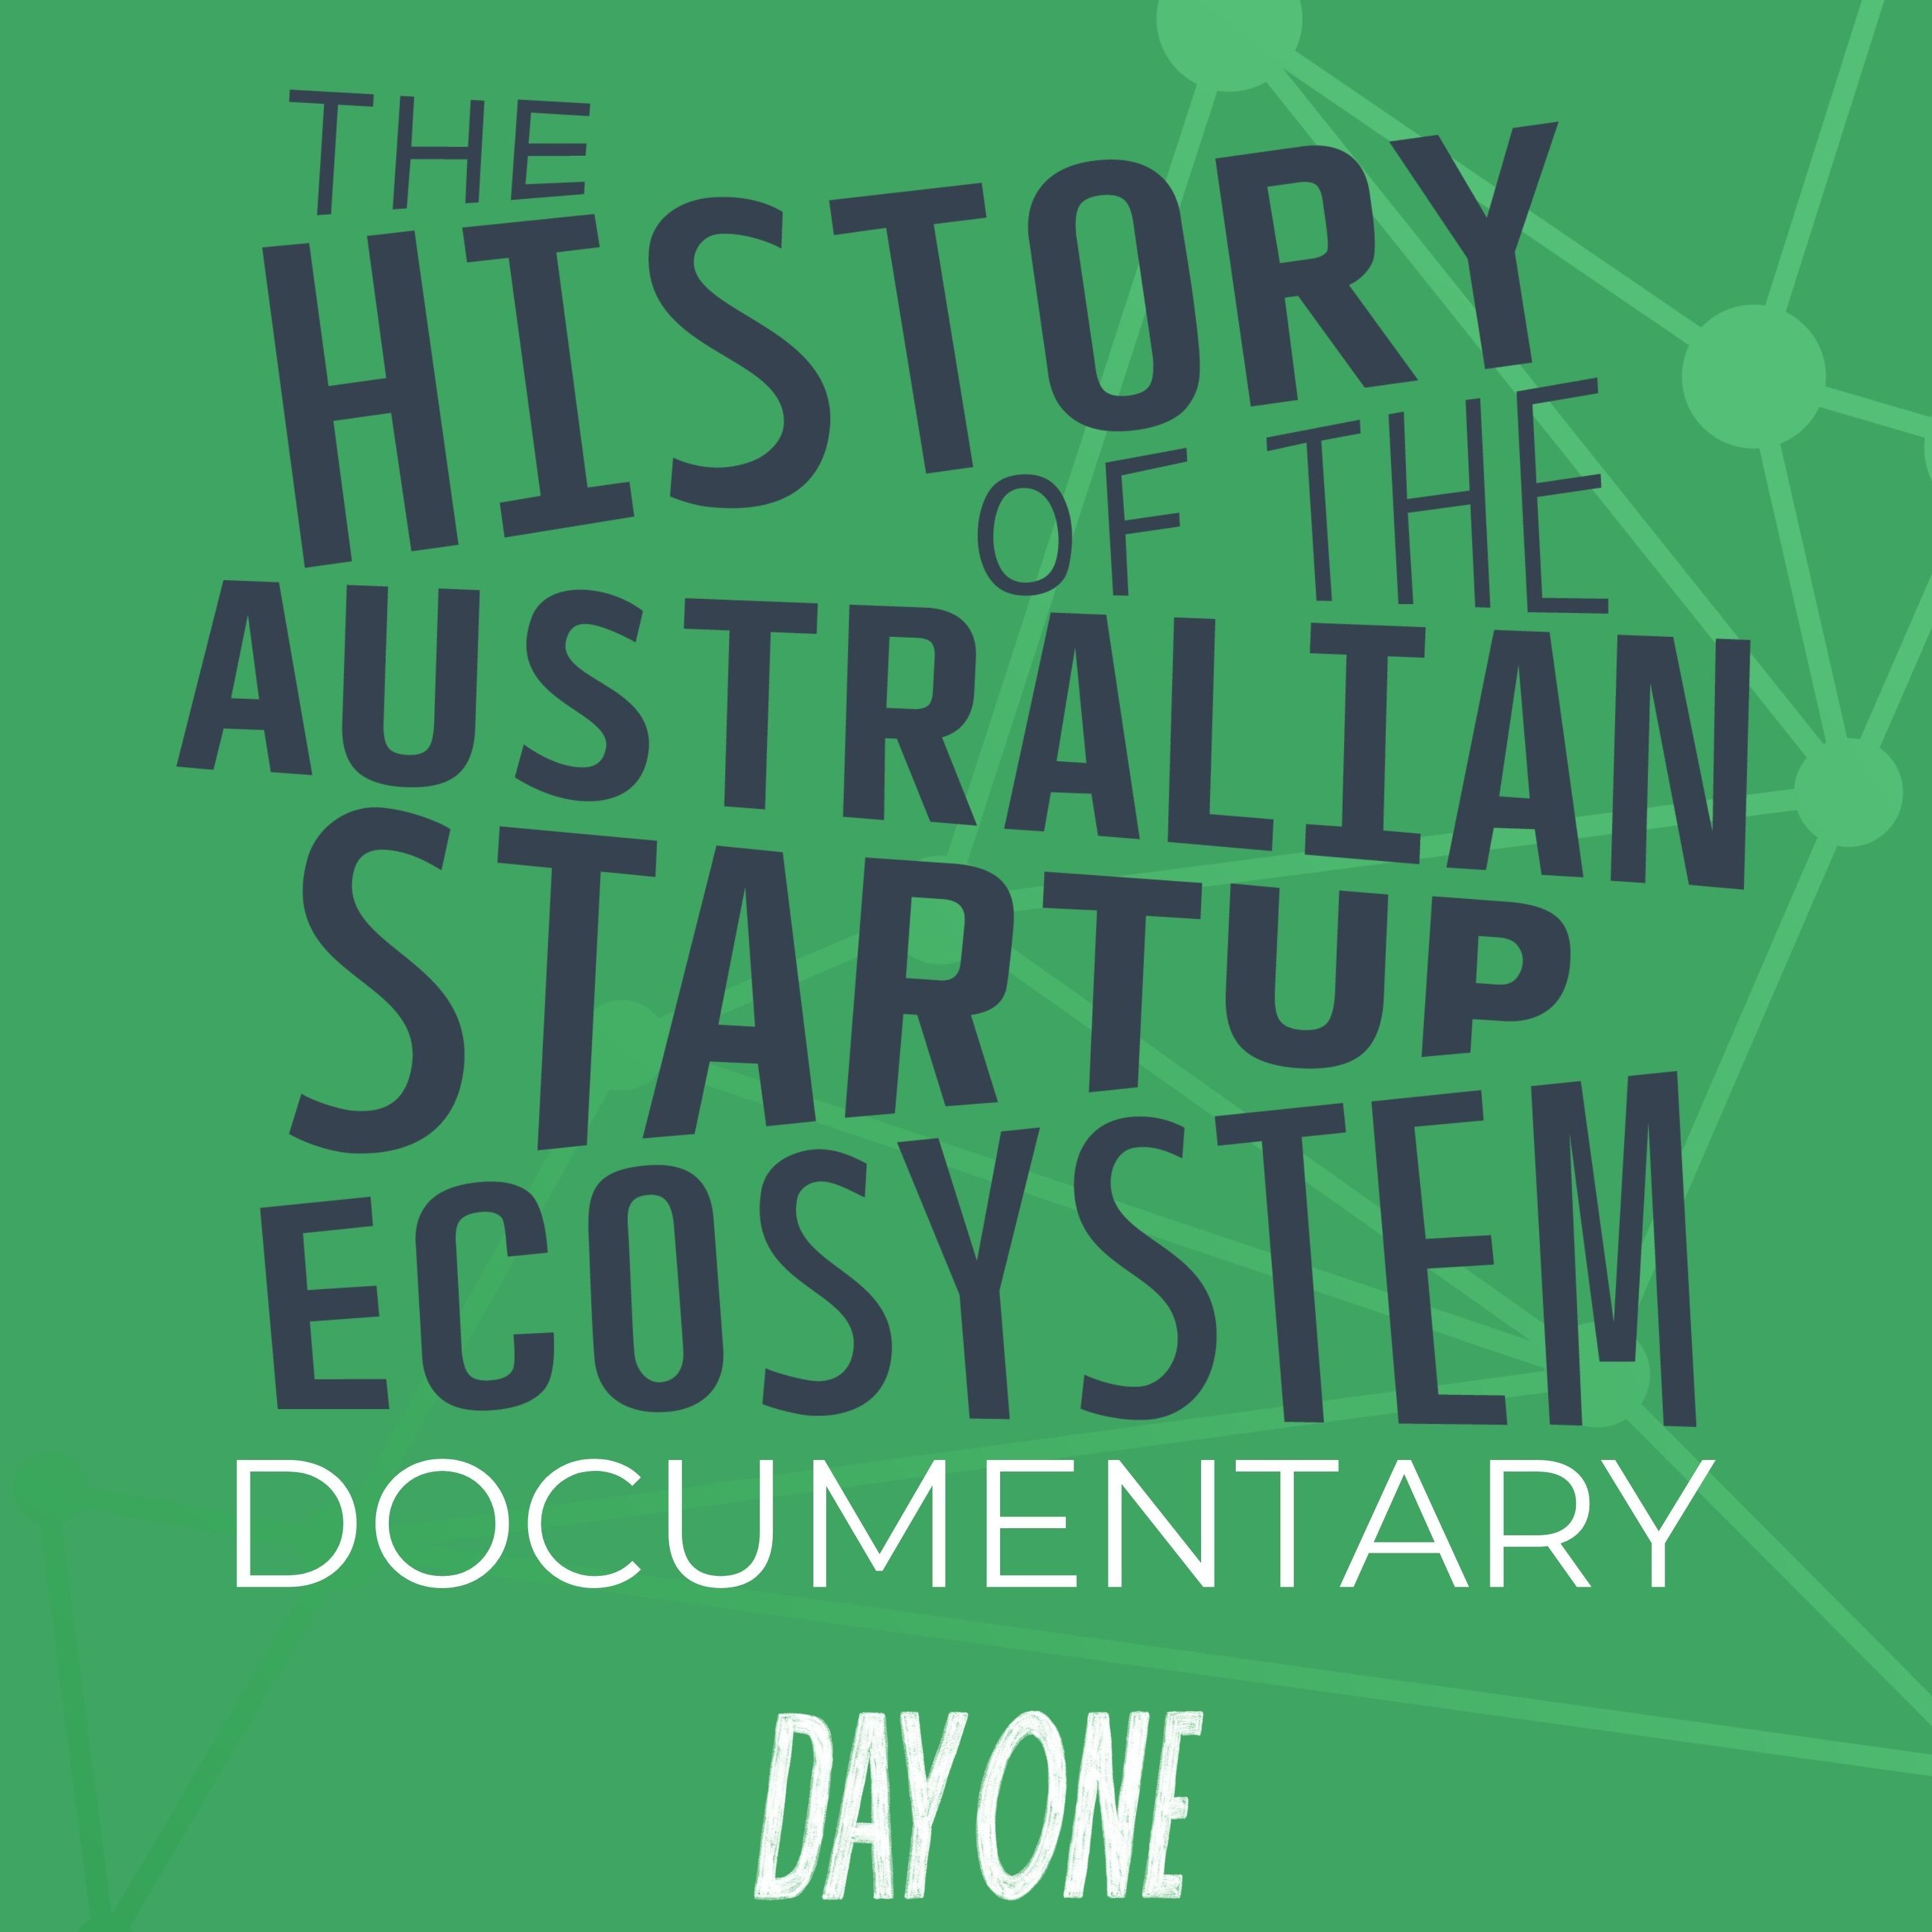 The History of the Australian Startup Ecosystem: Documentary